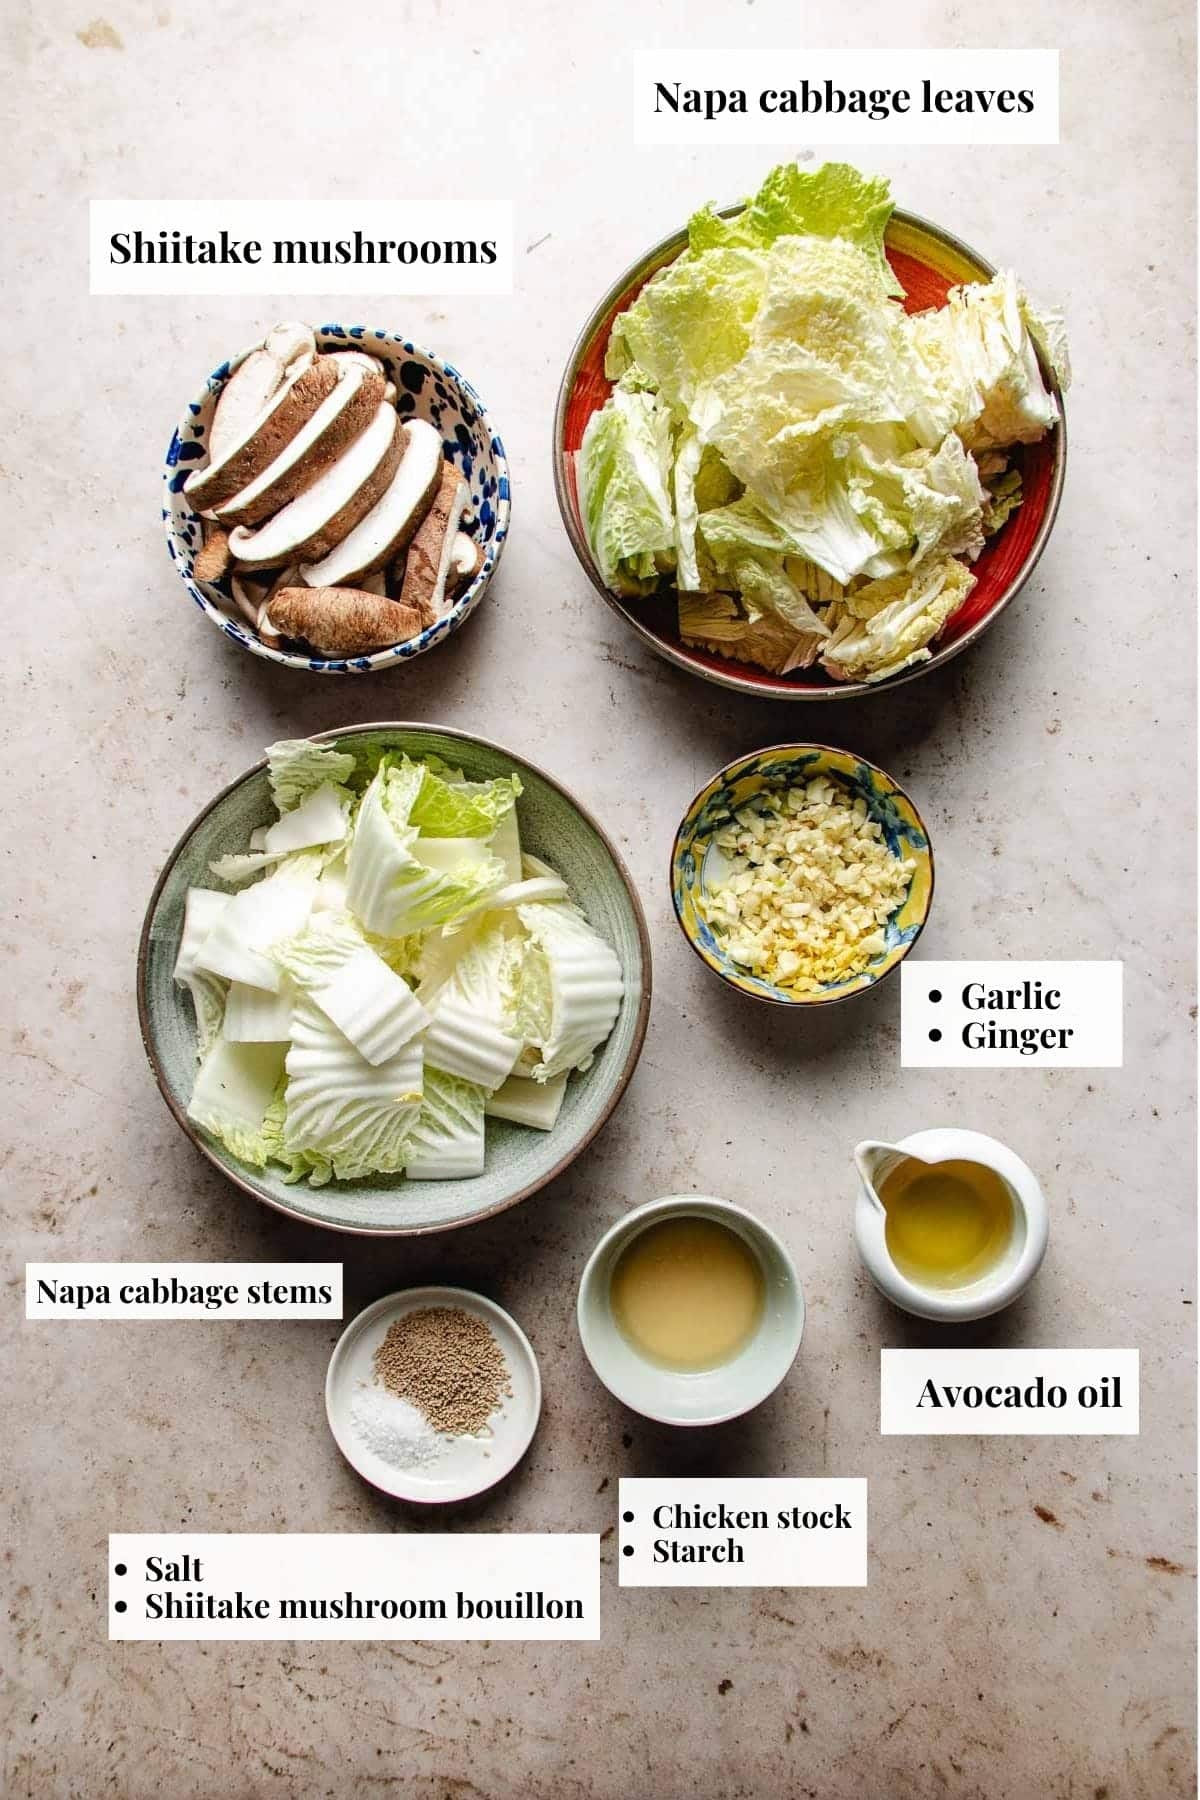 Image shows ingredients and seasonings used to saute Chinese cabbage dish.